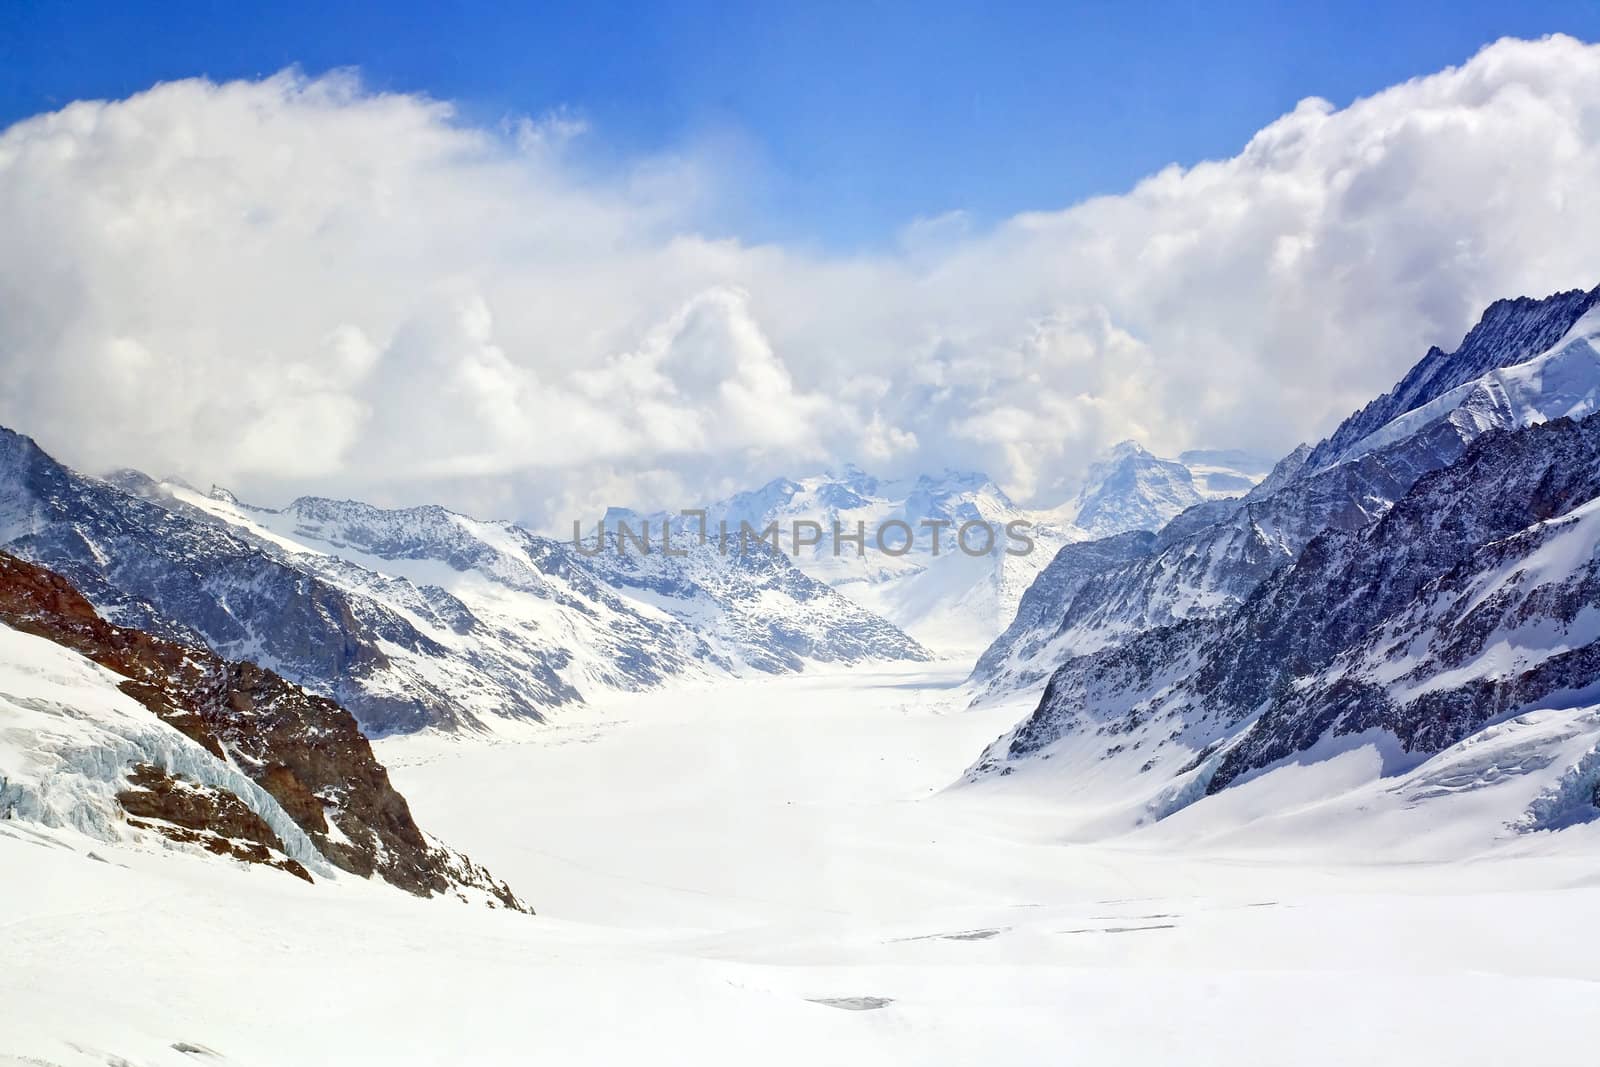 Closeup of Great Aletsch Glacier Jungfrau region,Part of Swiss Alpine Alps at Switzerland. Great Aletsch Glacier is one of the World Heritage by UNESCO